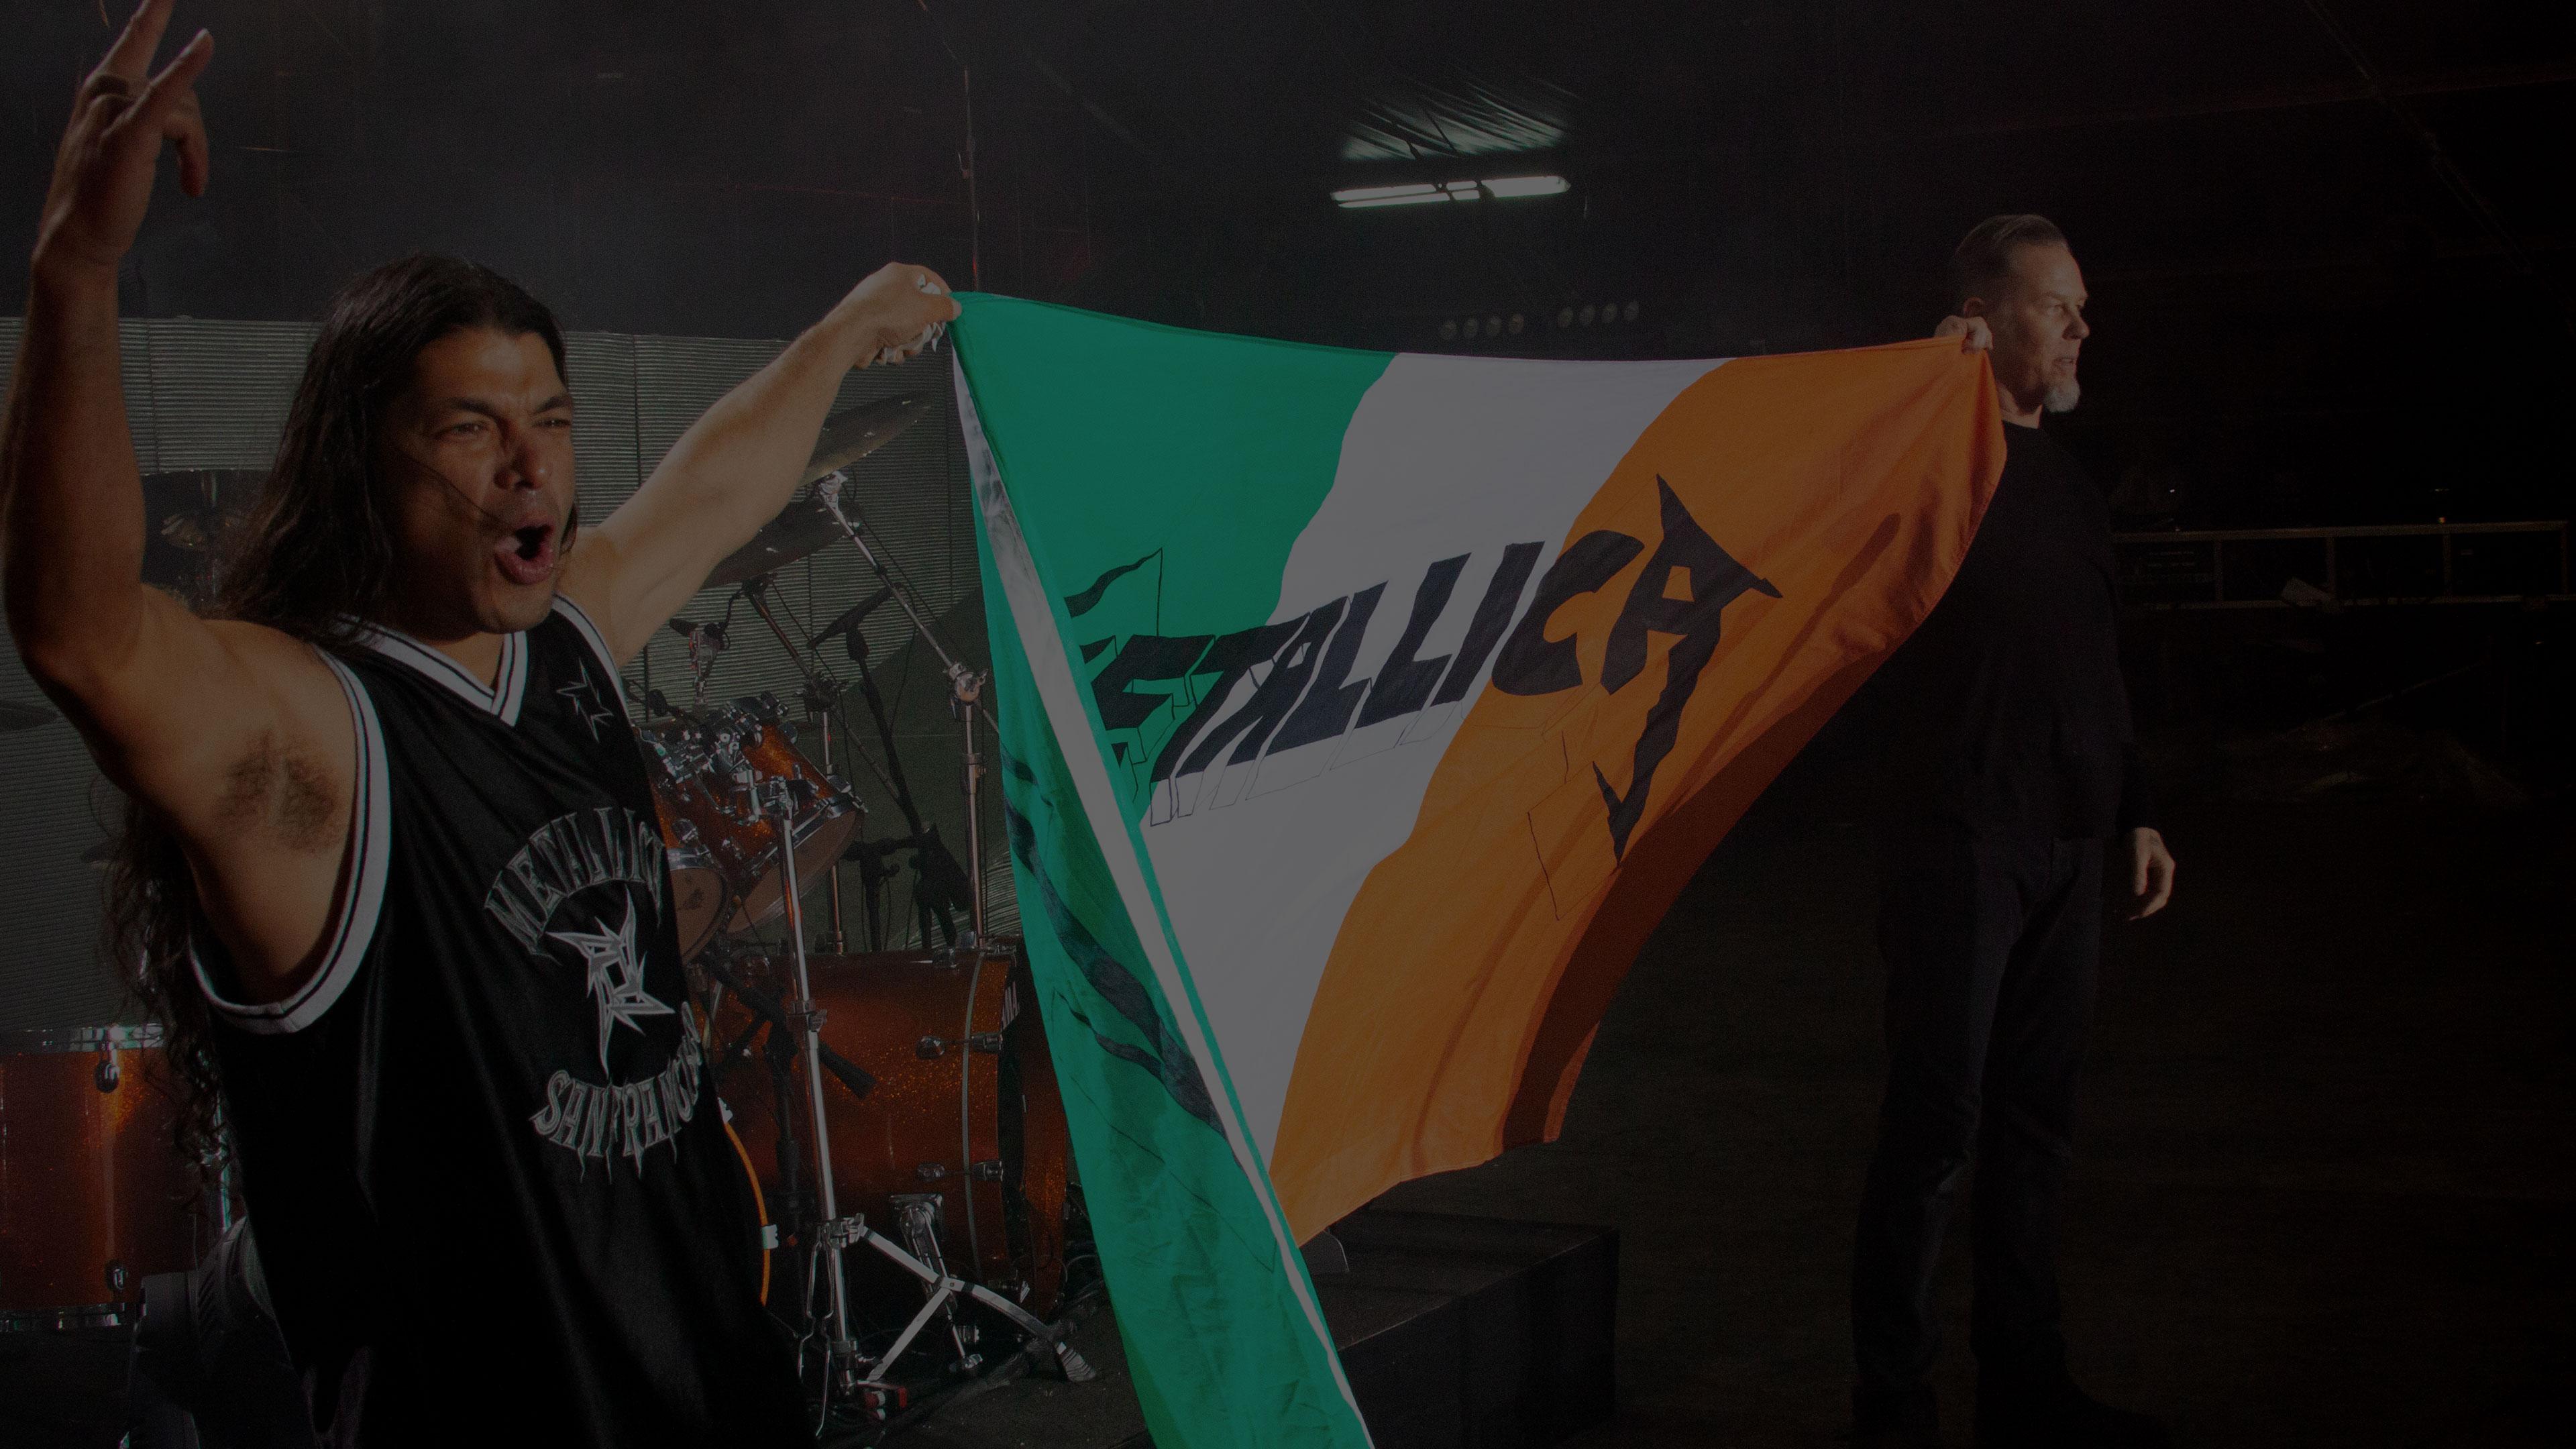 Banner Image for the photo gallery from the gig in Dublin, Ireland shot on August 1, 2009